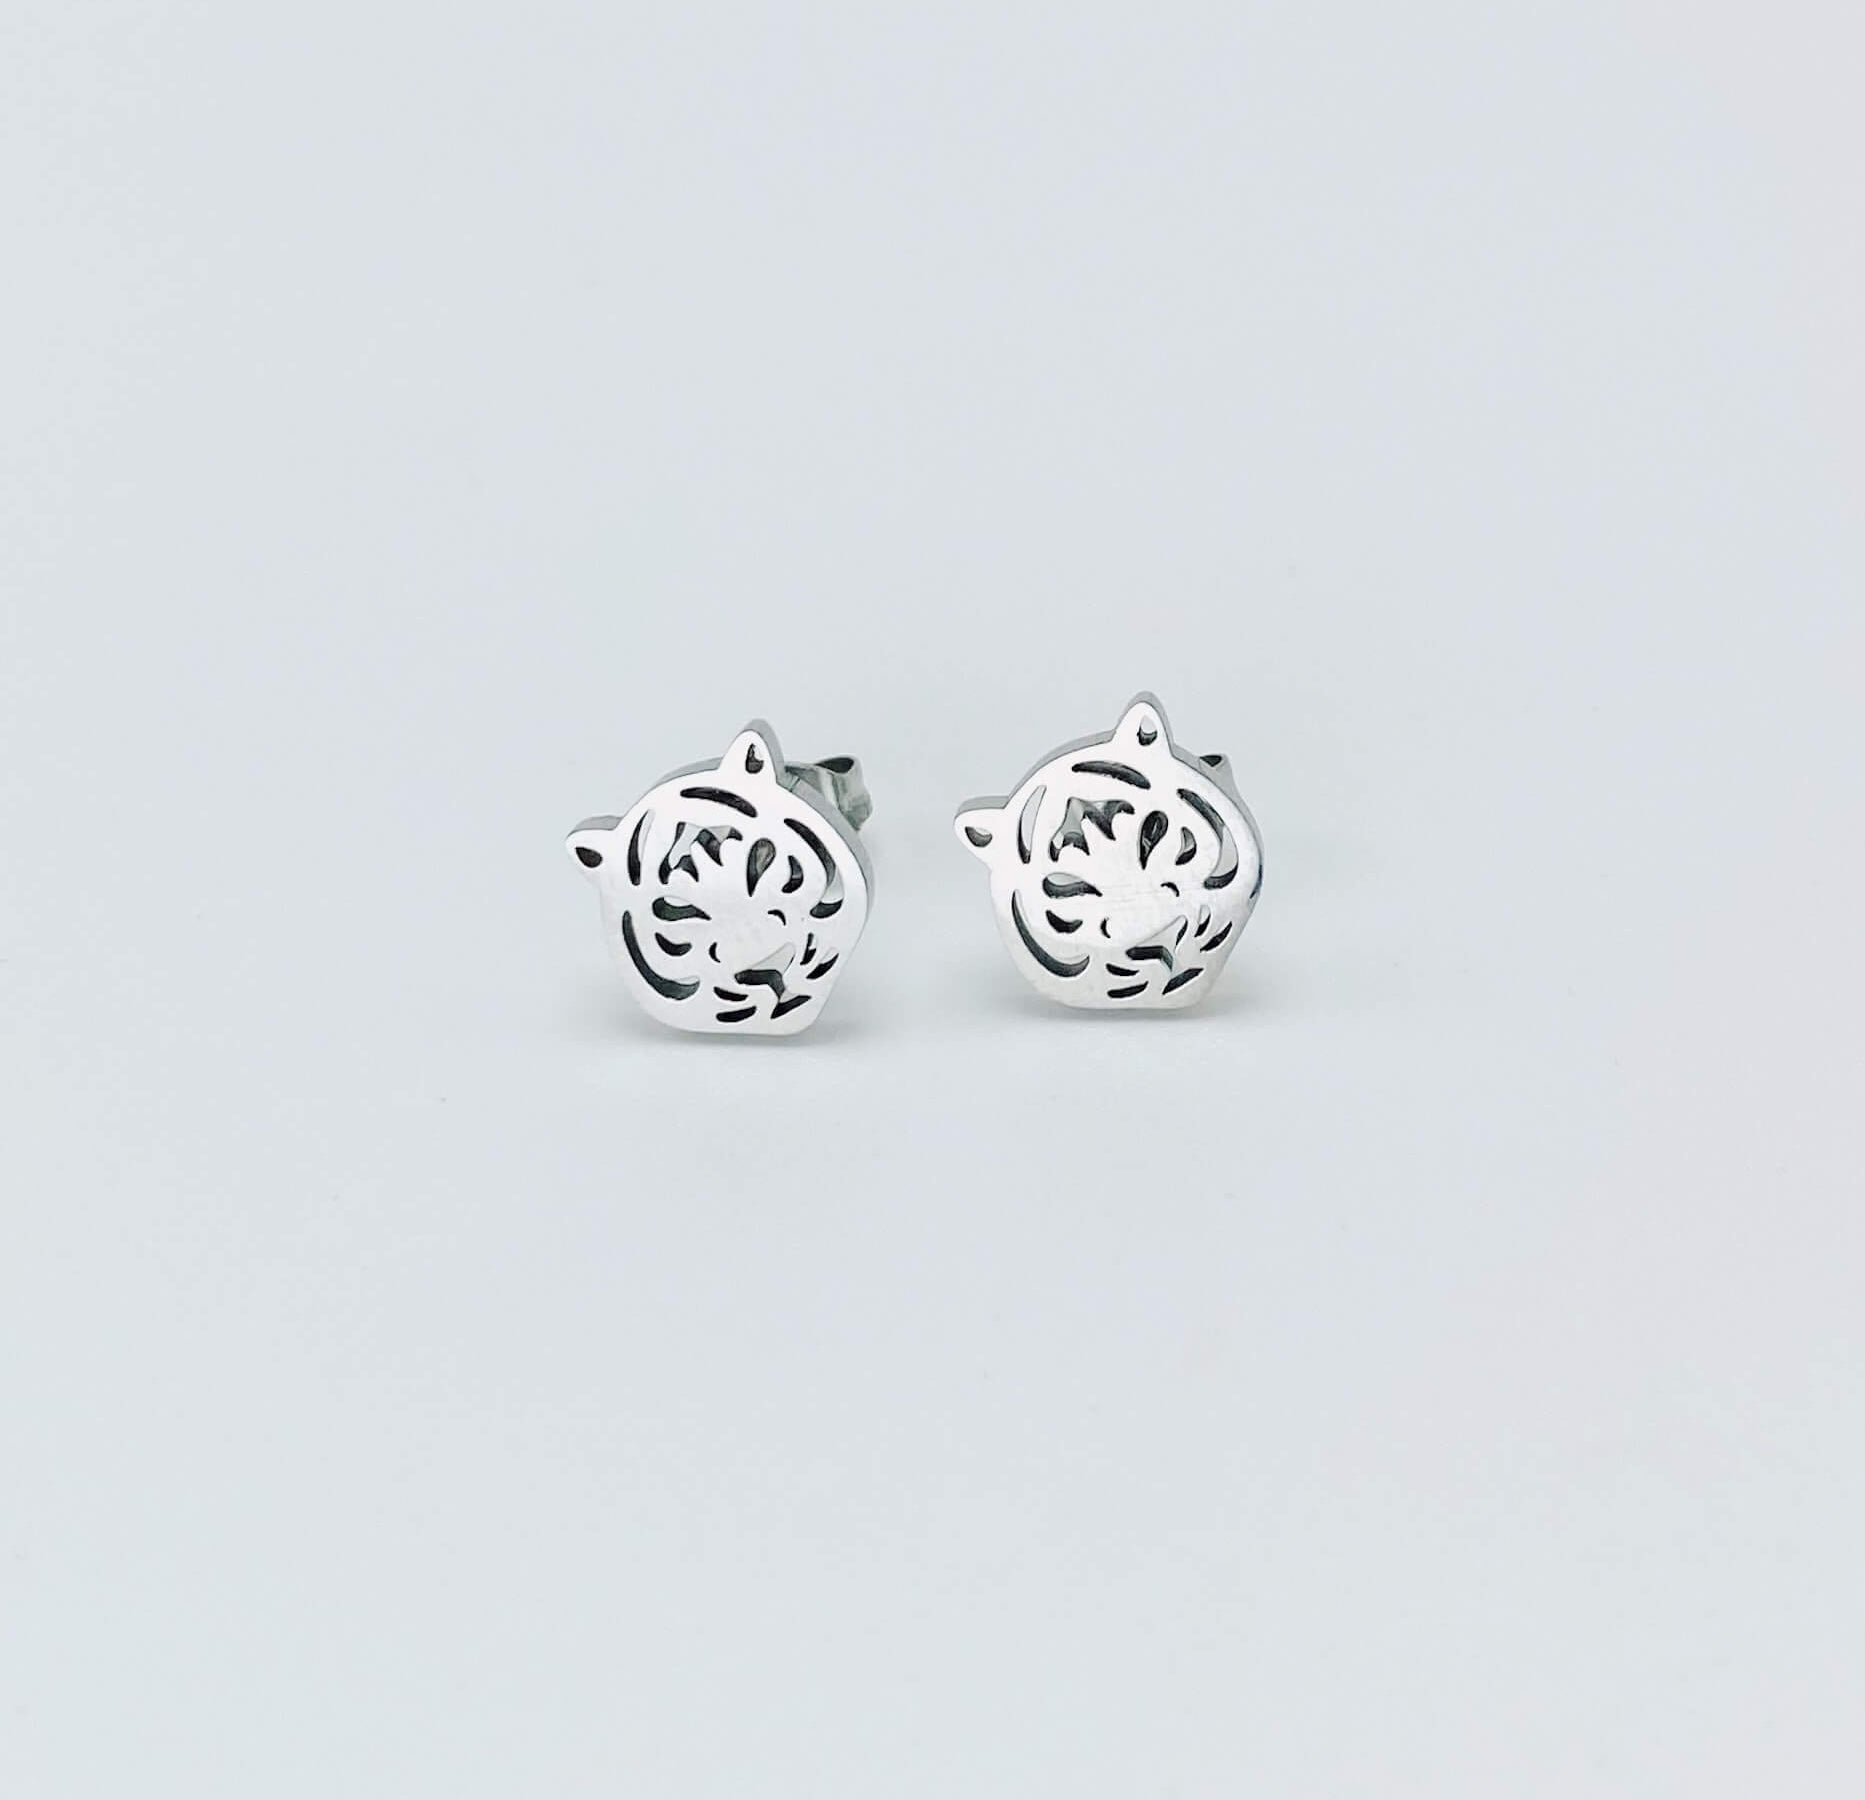 Metallic tiger stud earrings in a silver hue made from stainless steel. 